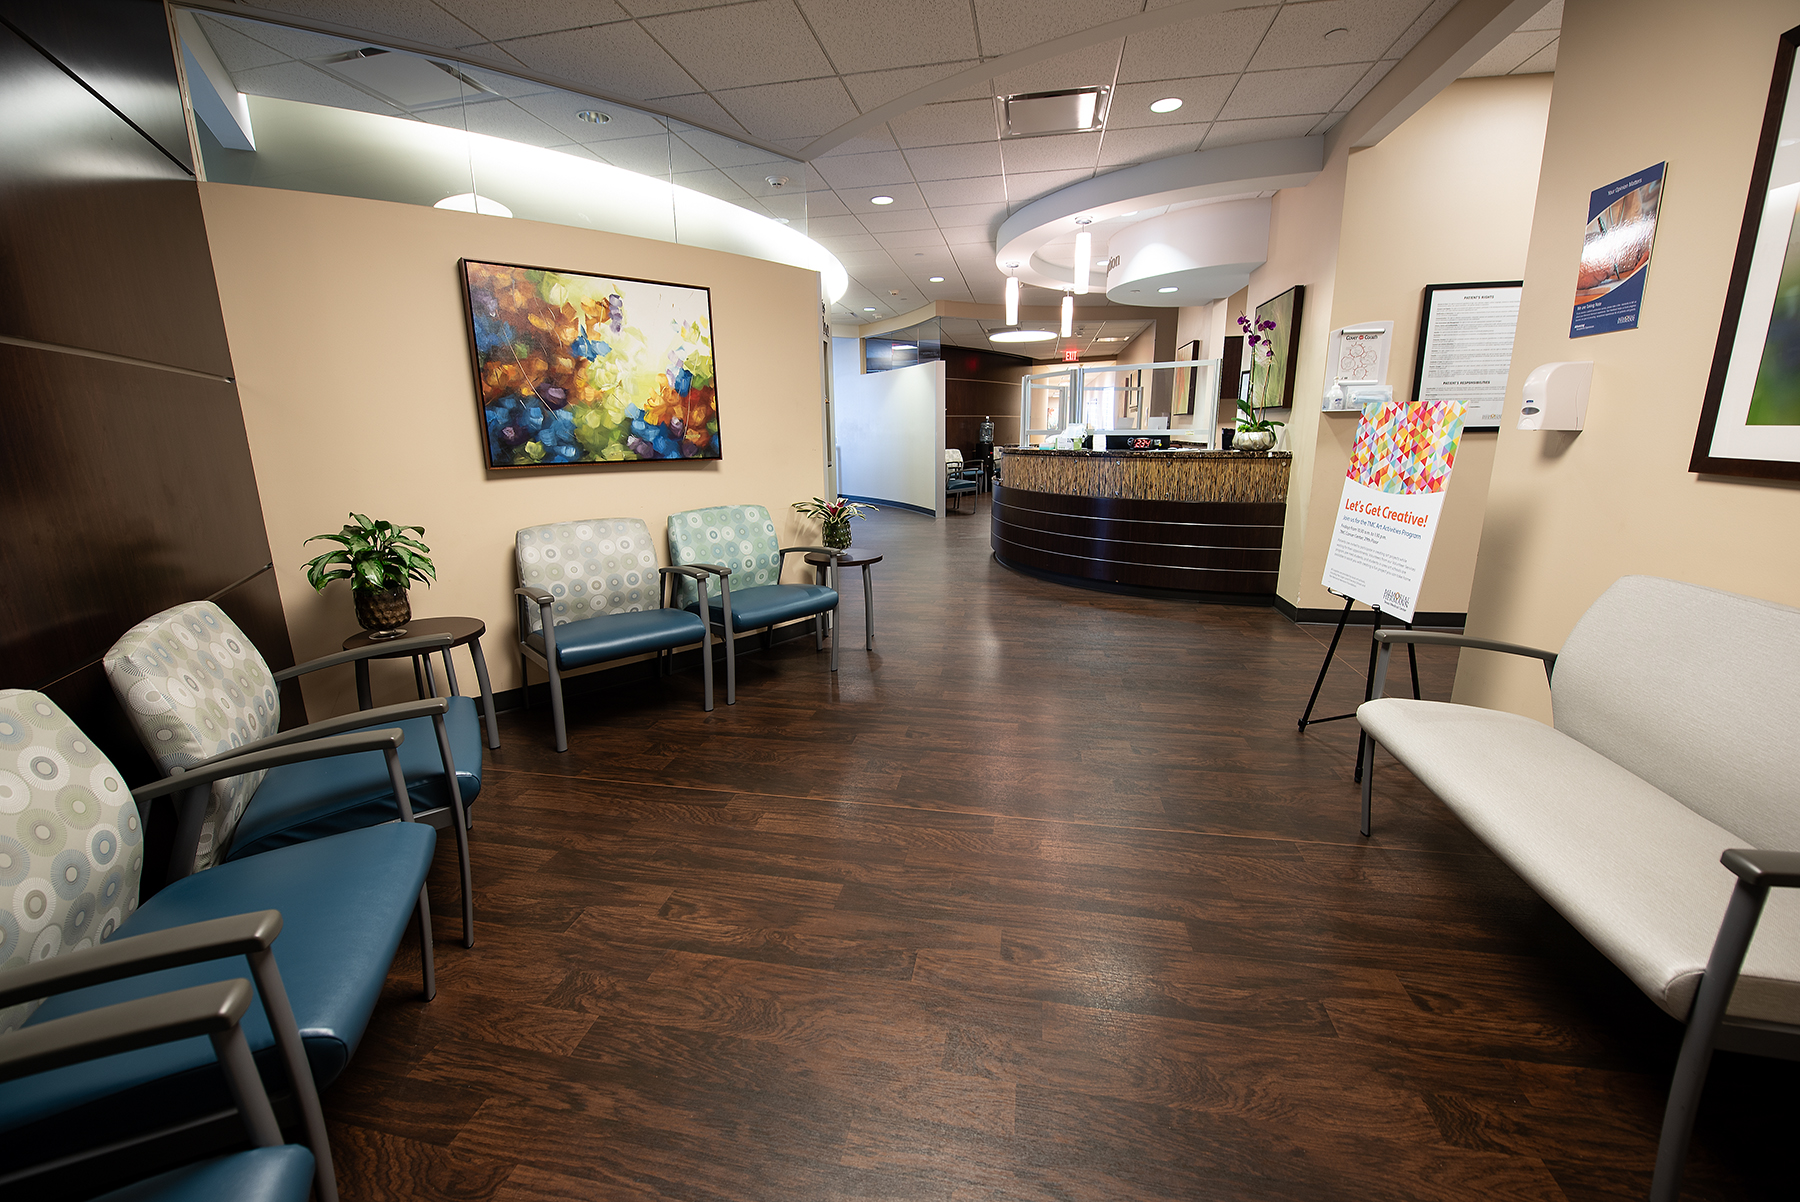 Waiting Area in Cancer Center